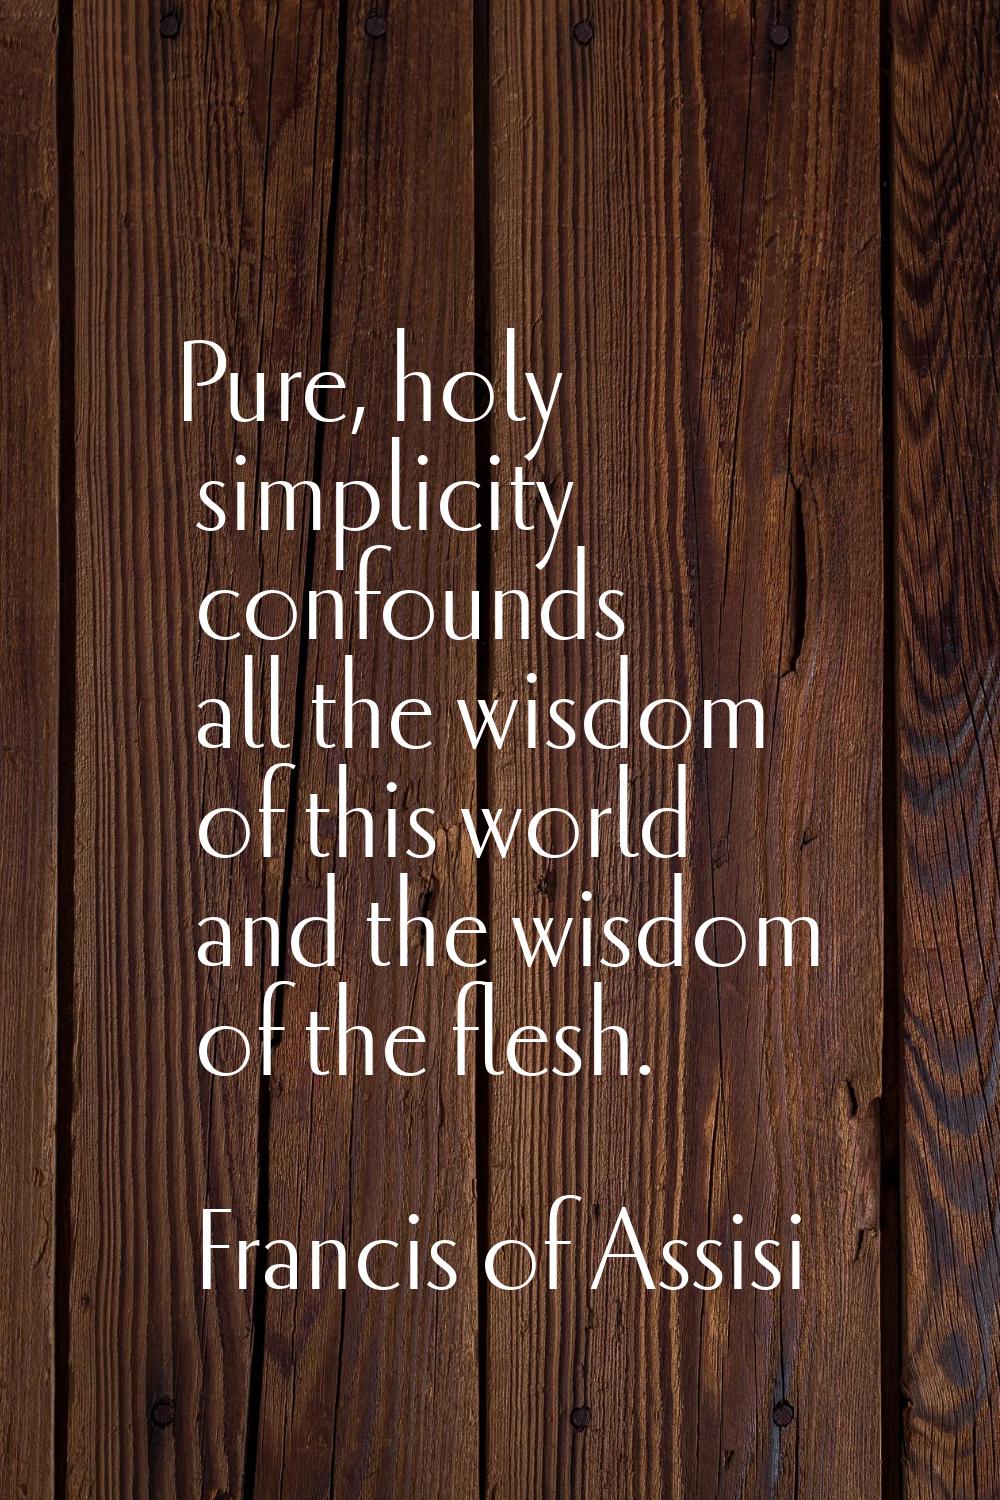 Pure, holy simplicity confounds all the wisdom of this world and the wisdom of the flesh.